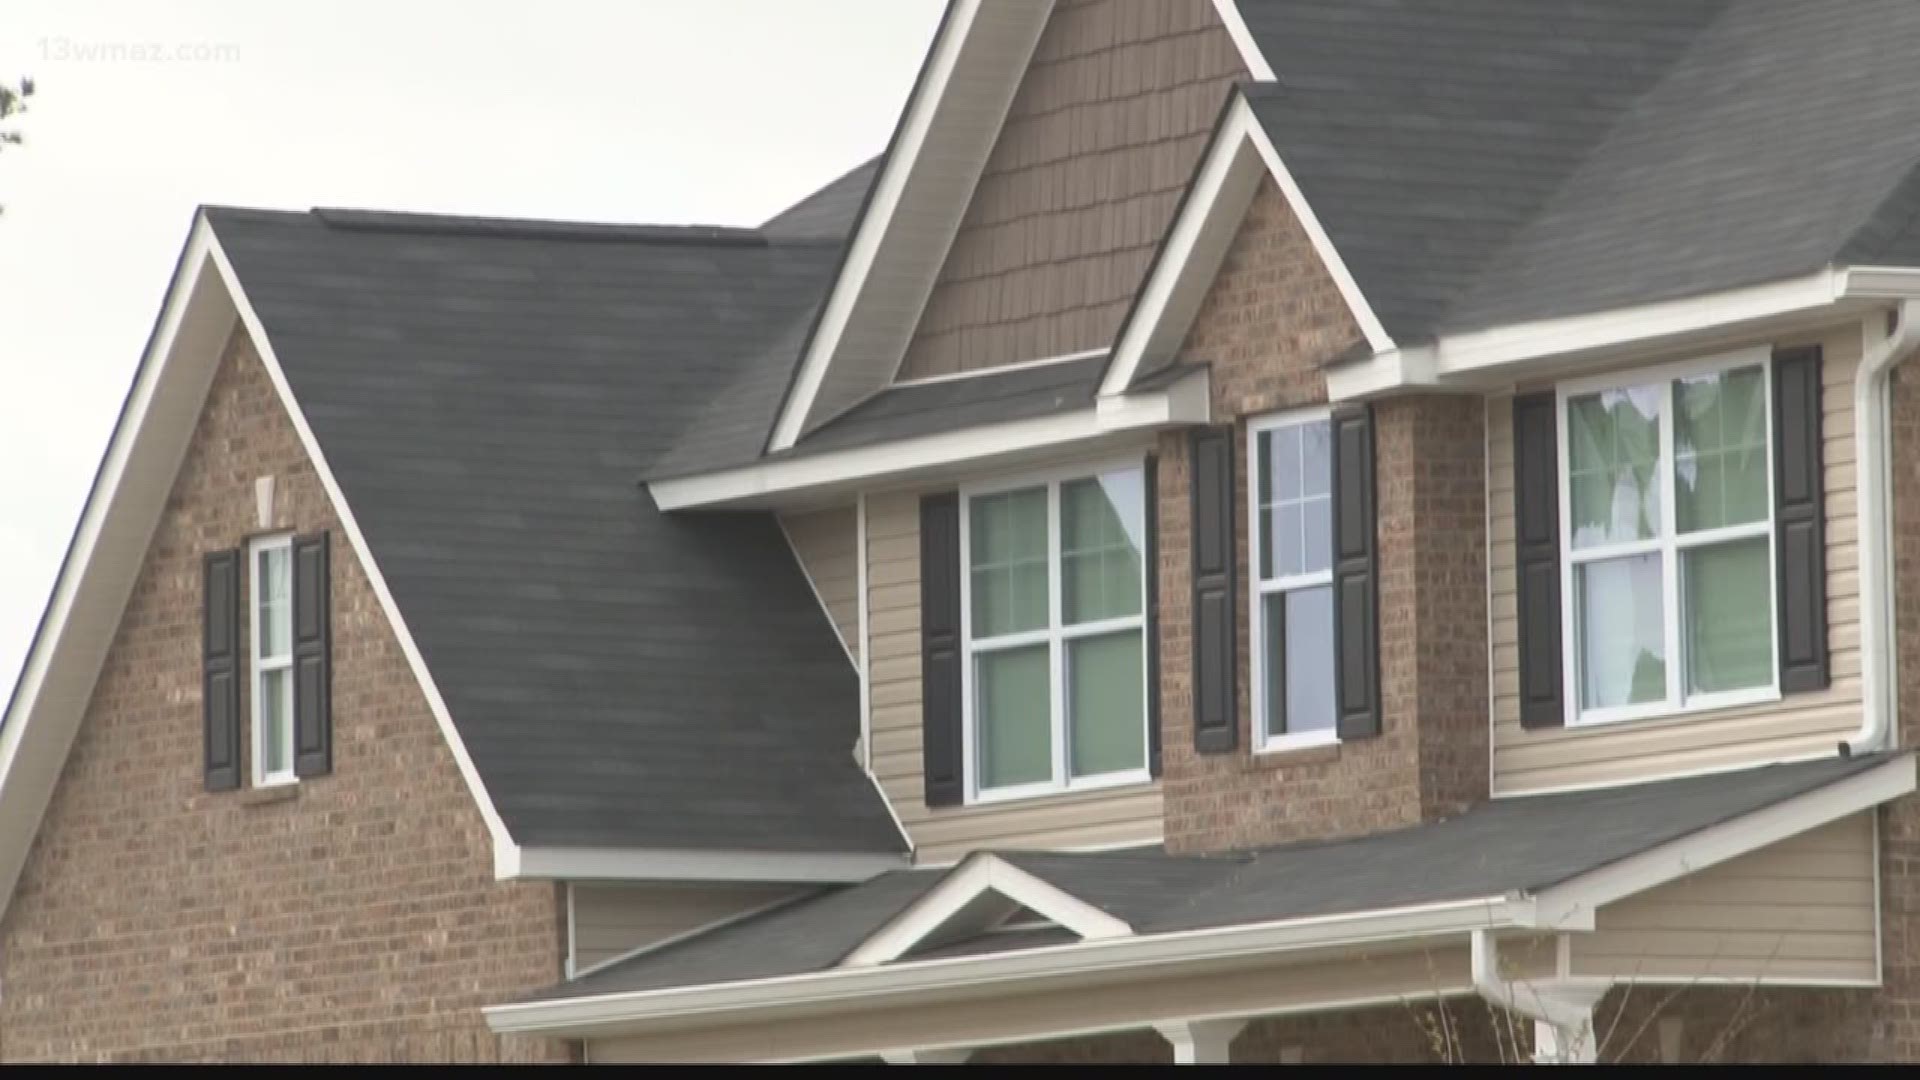 More than 900 homes built in Houston County in 2017